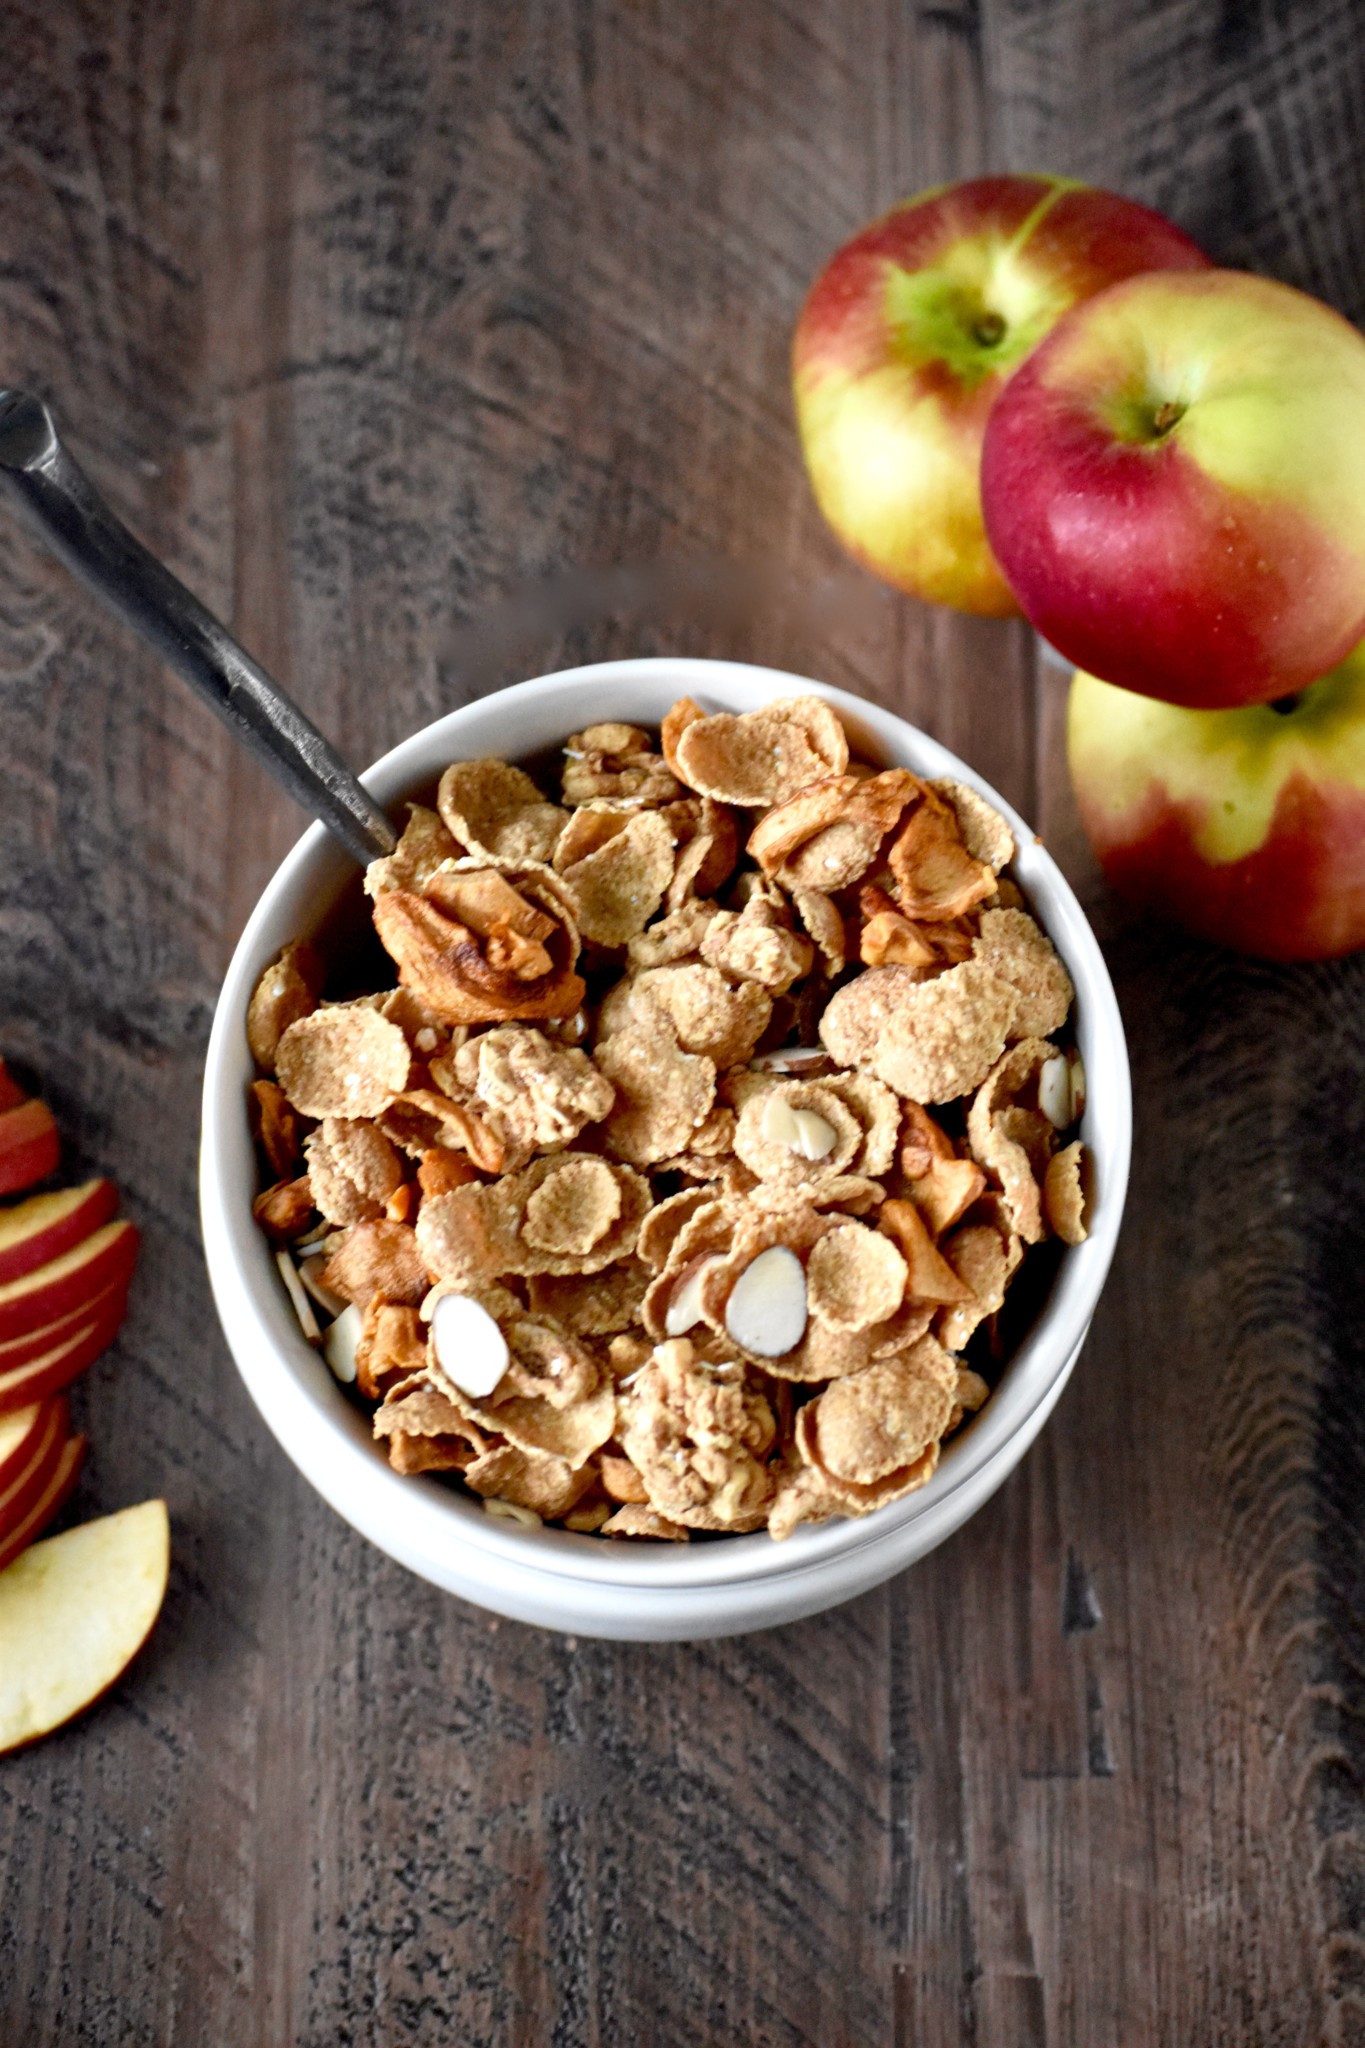 apple cinnamon almond breakfast cereal - a autumnal take on an everyday breakfast! // cait's plate